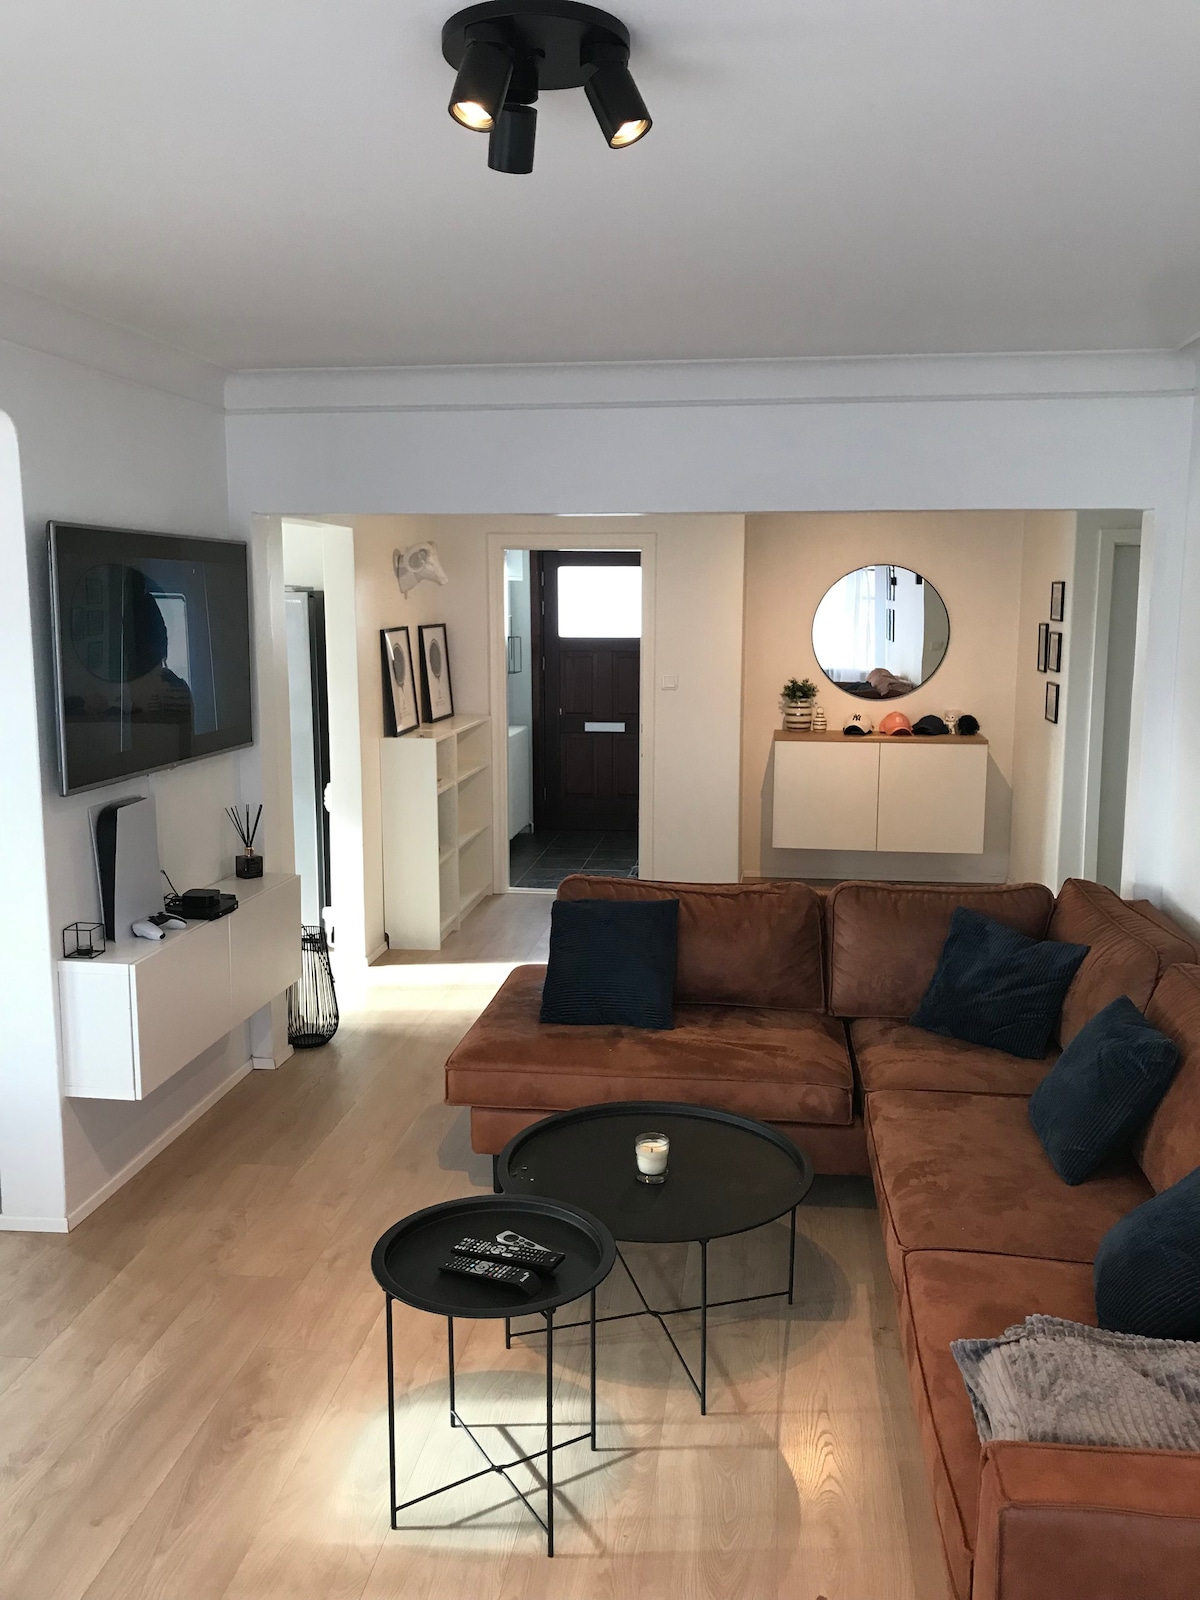 Lovely 2 bedroom apartment in downtown Keflavik.